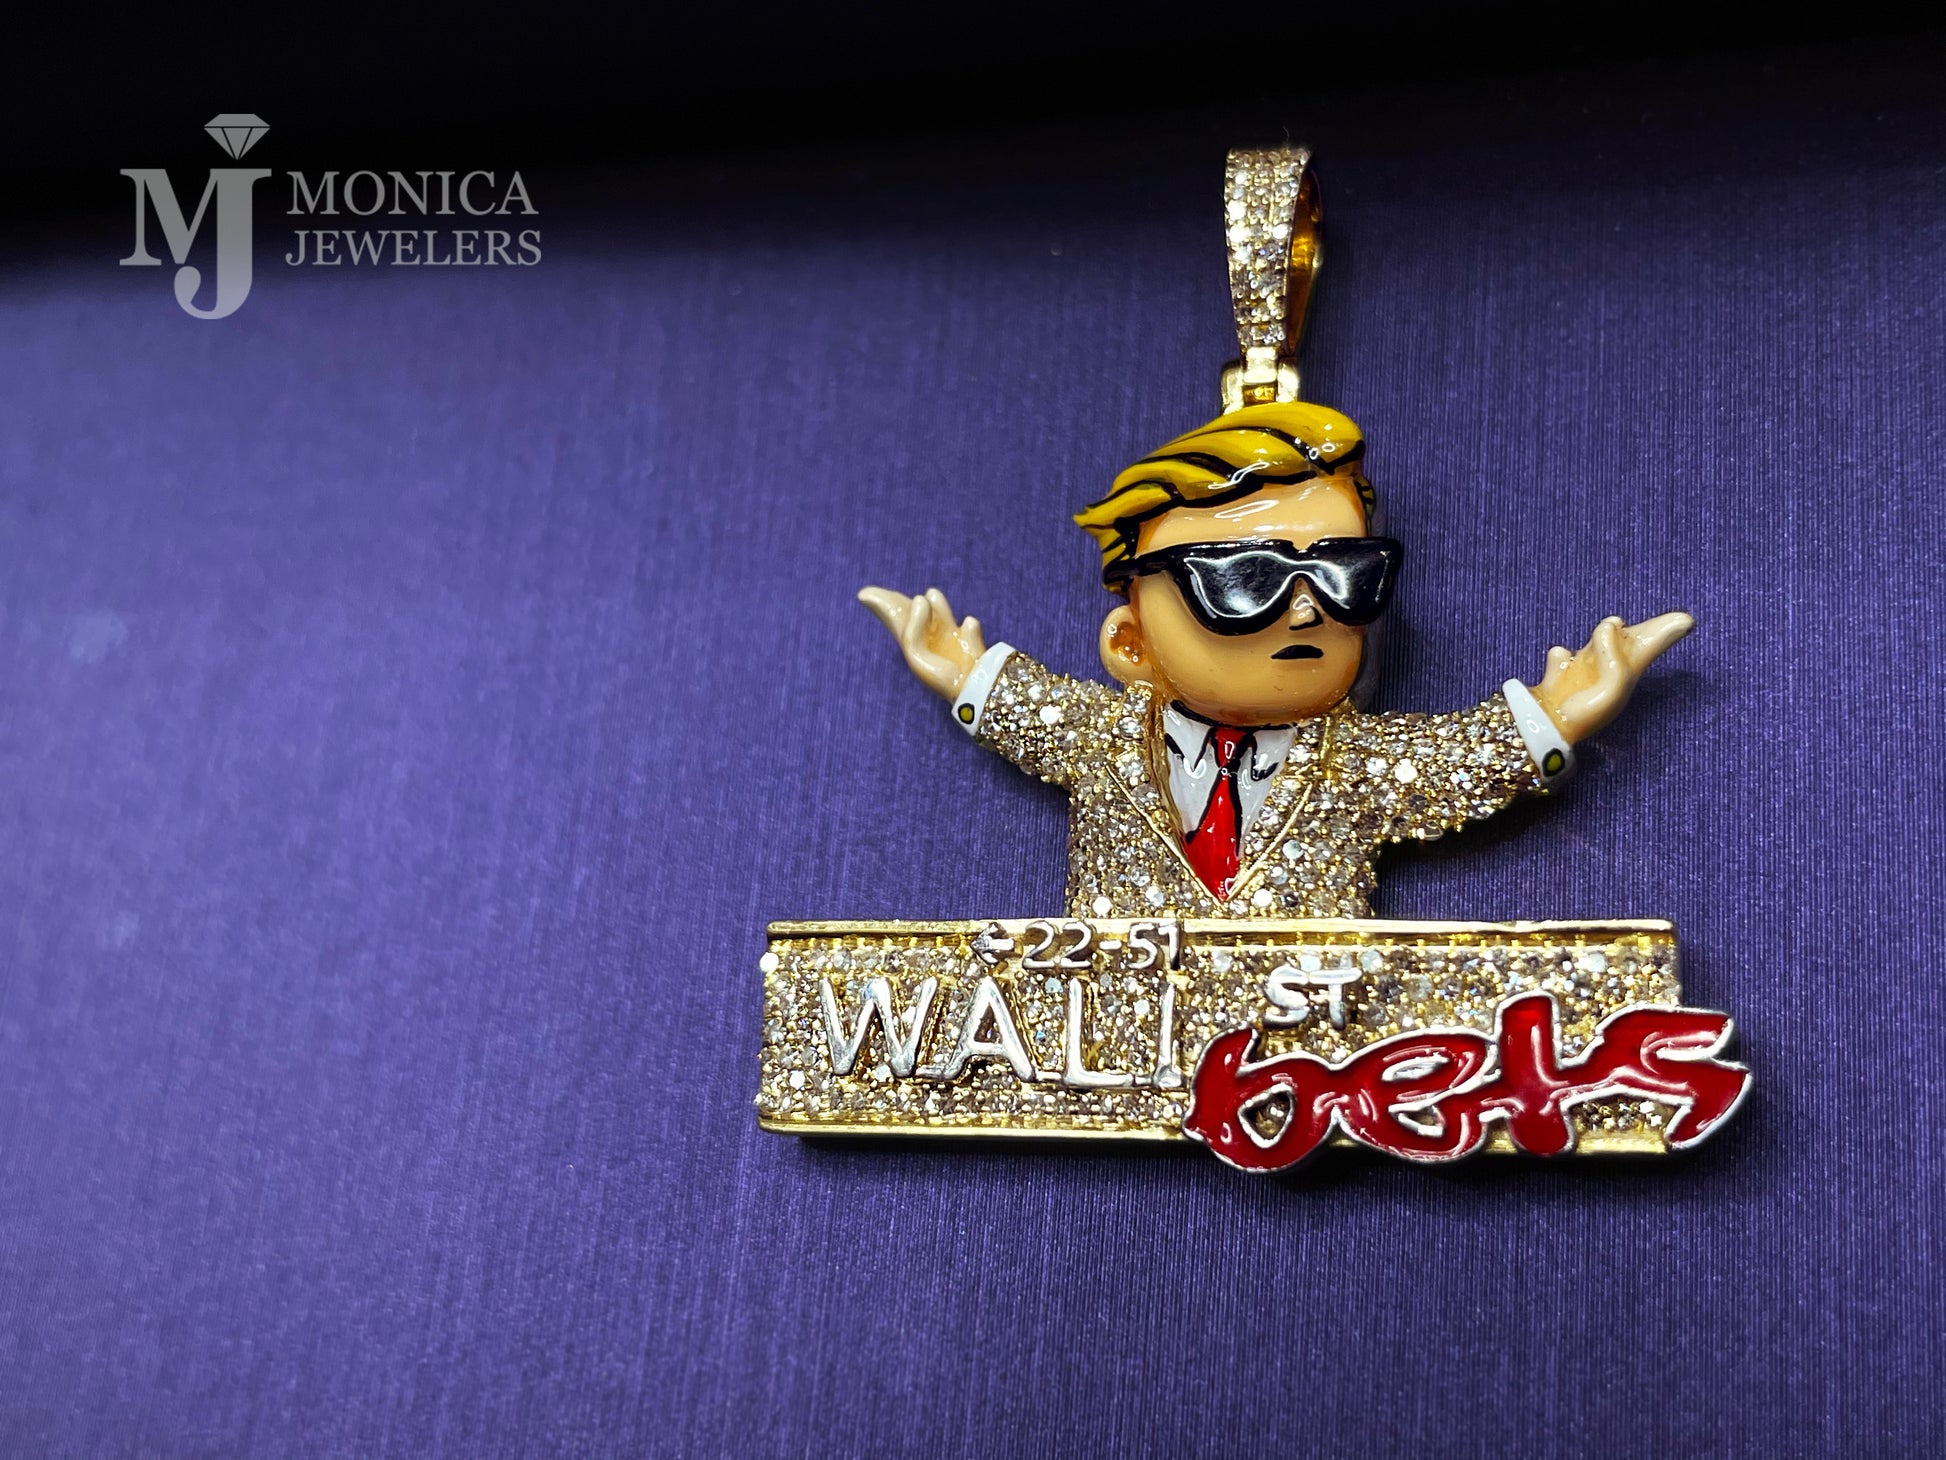 10k yellow Gold Wallstreet Bets pendant with 1ctw